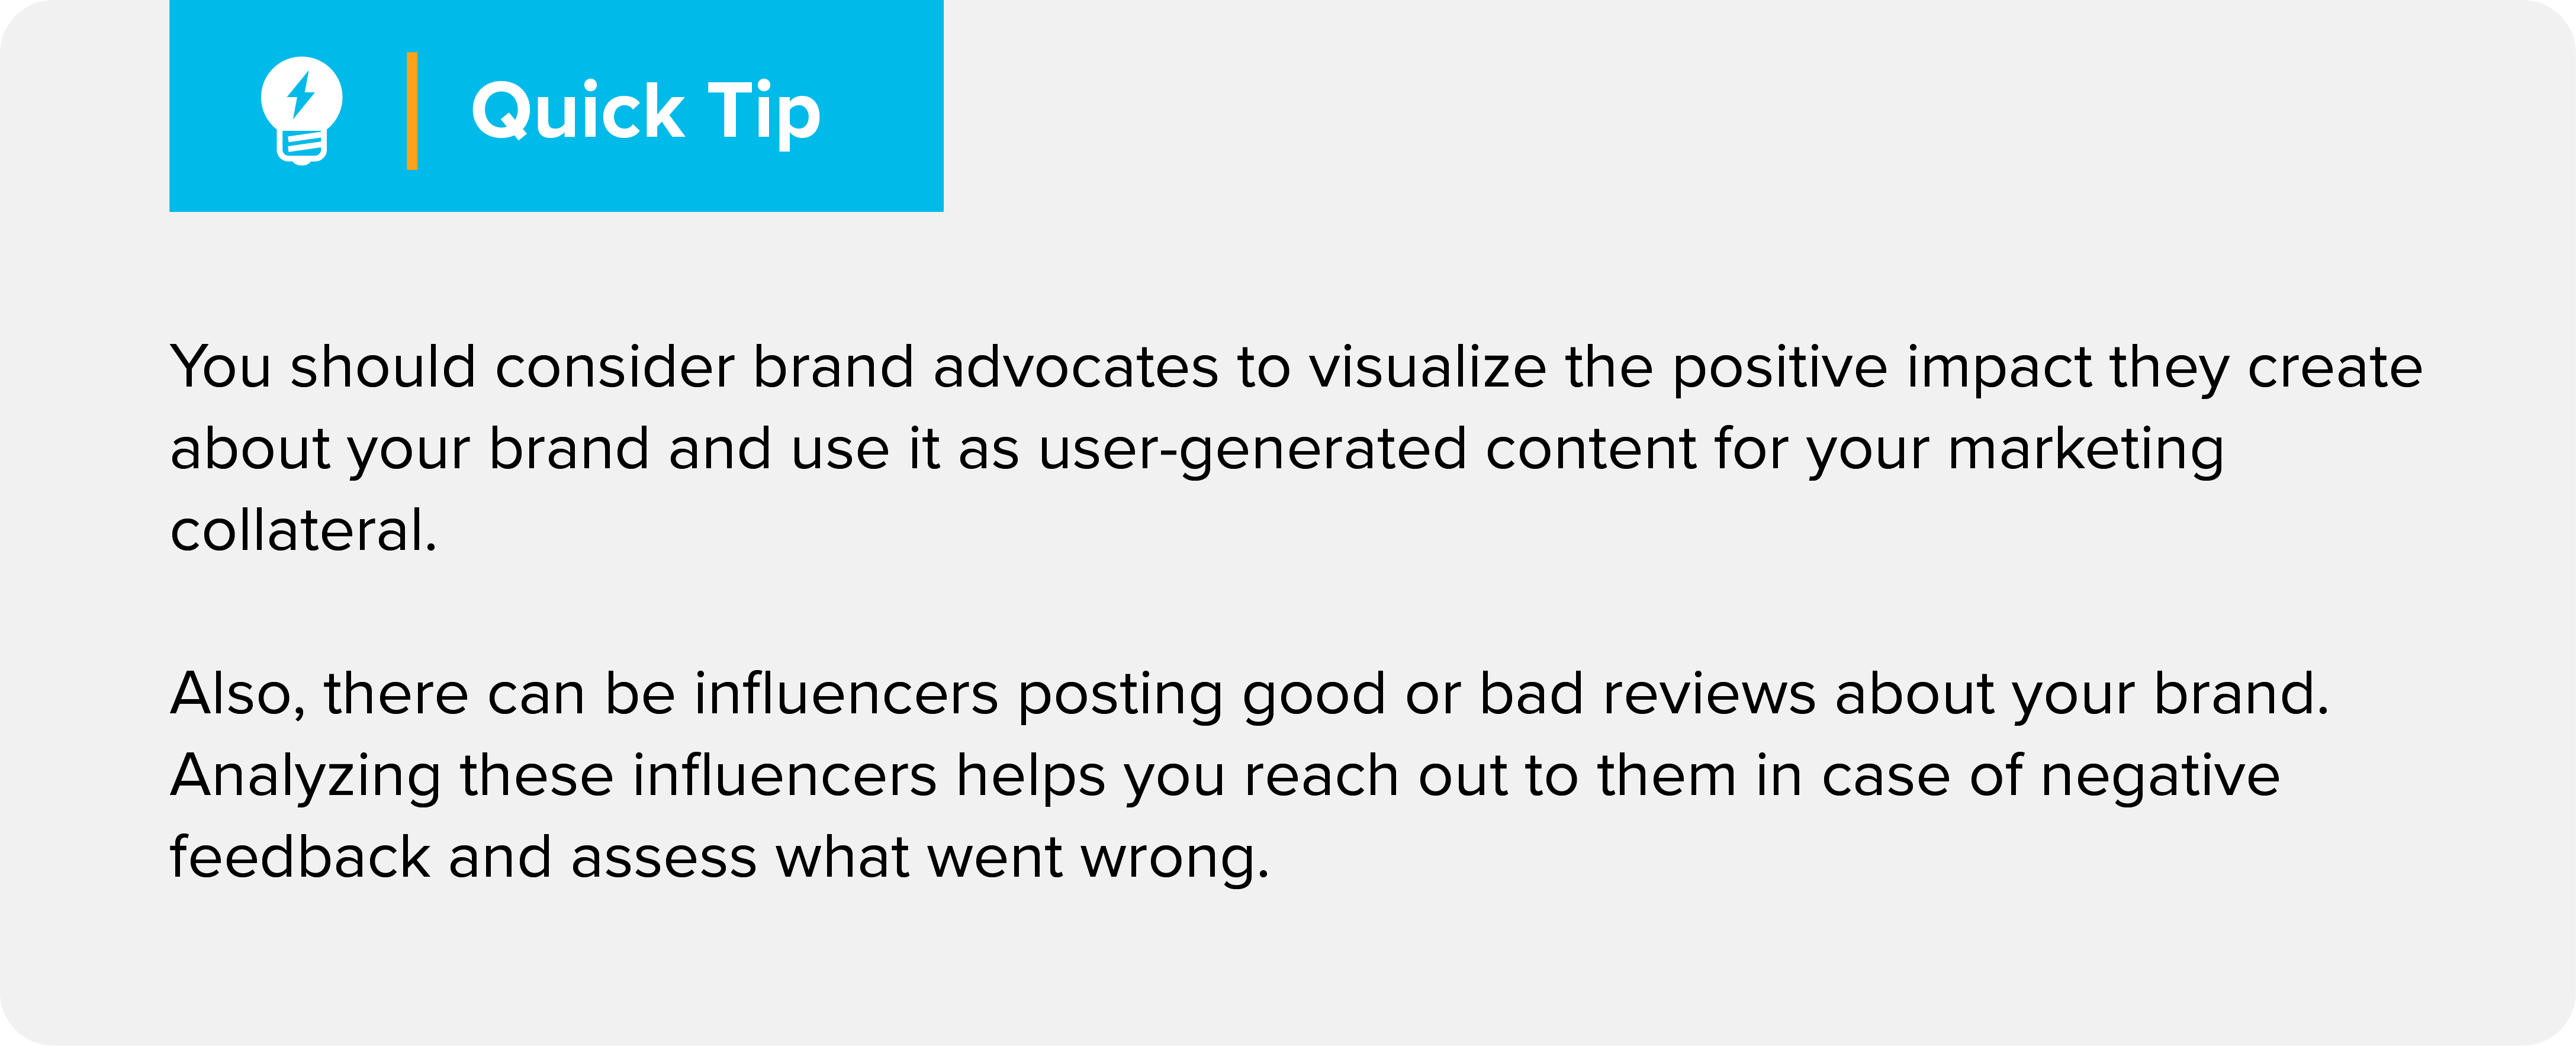 A quick tip on managing positive and negative user-generated content for marketing